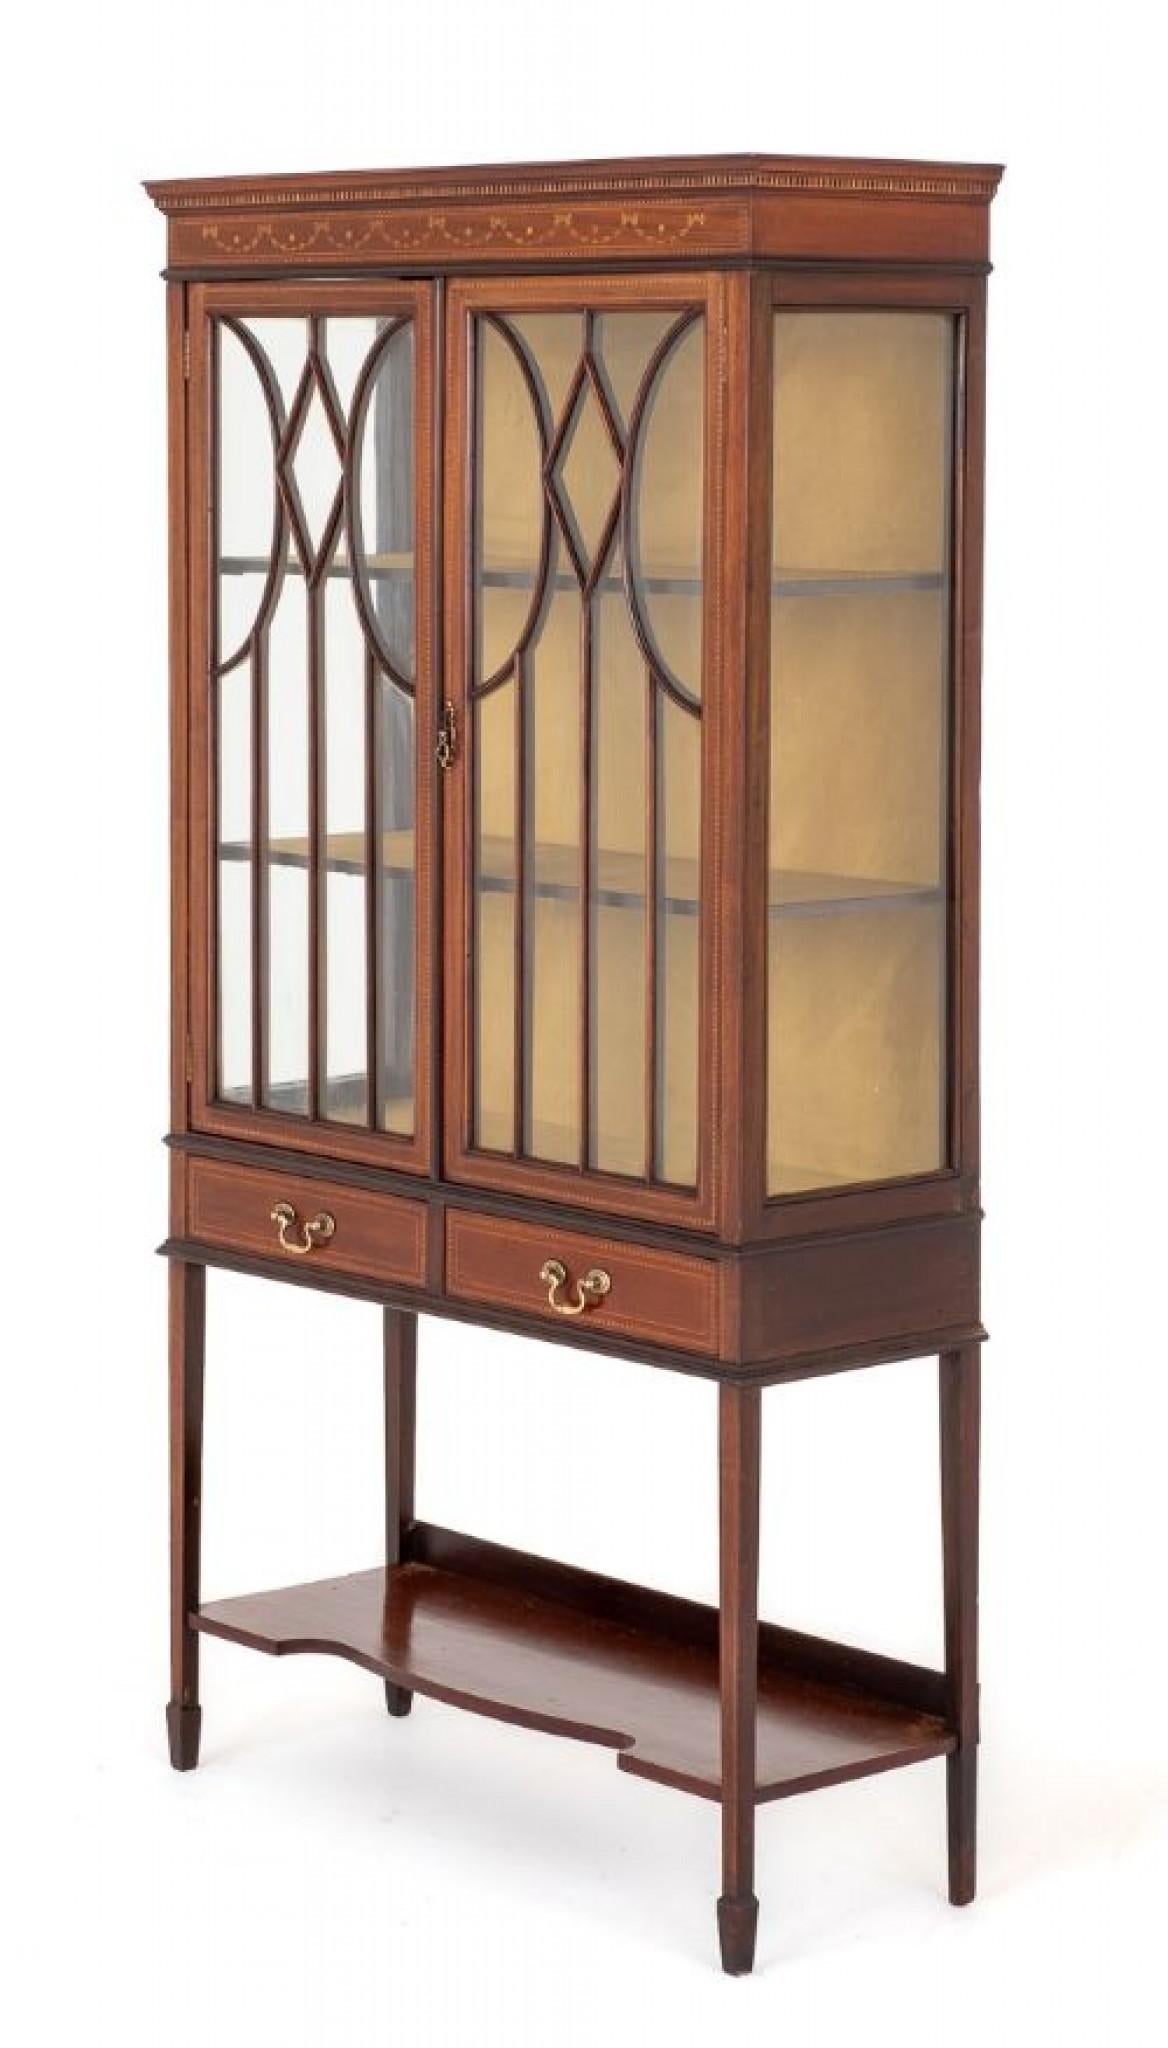 Sheraton Revival Mahogany Inlaid Display Cabinet.
Circa 1880
This Display Cabinet is Raised upon Tapered Legs with Spade Feet.
The Cabinet Features a Shaped Undertray.
Having 2 Mahogany Lined Drawers with Brass Swan Neck Handles.
The Astragal Glazed